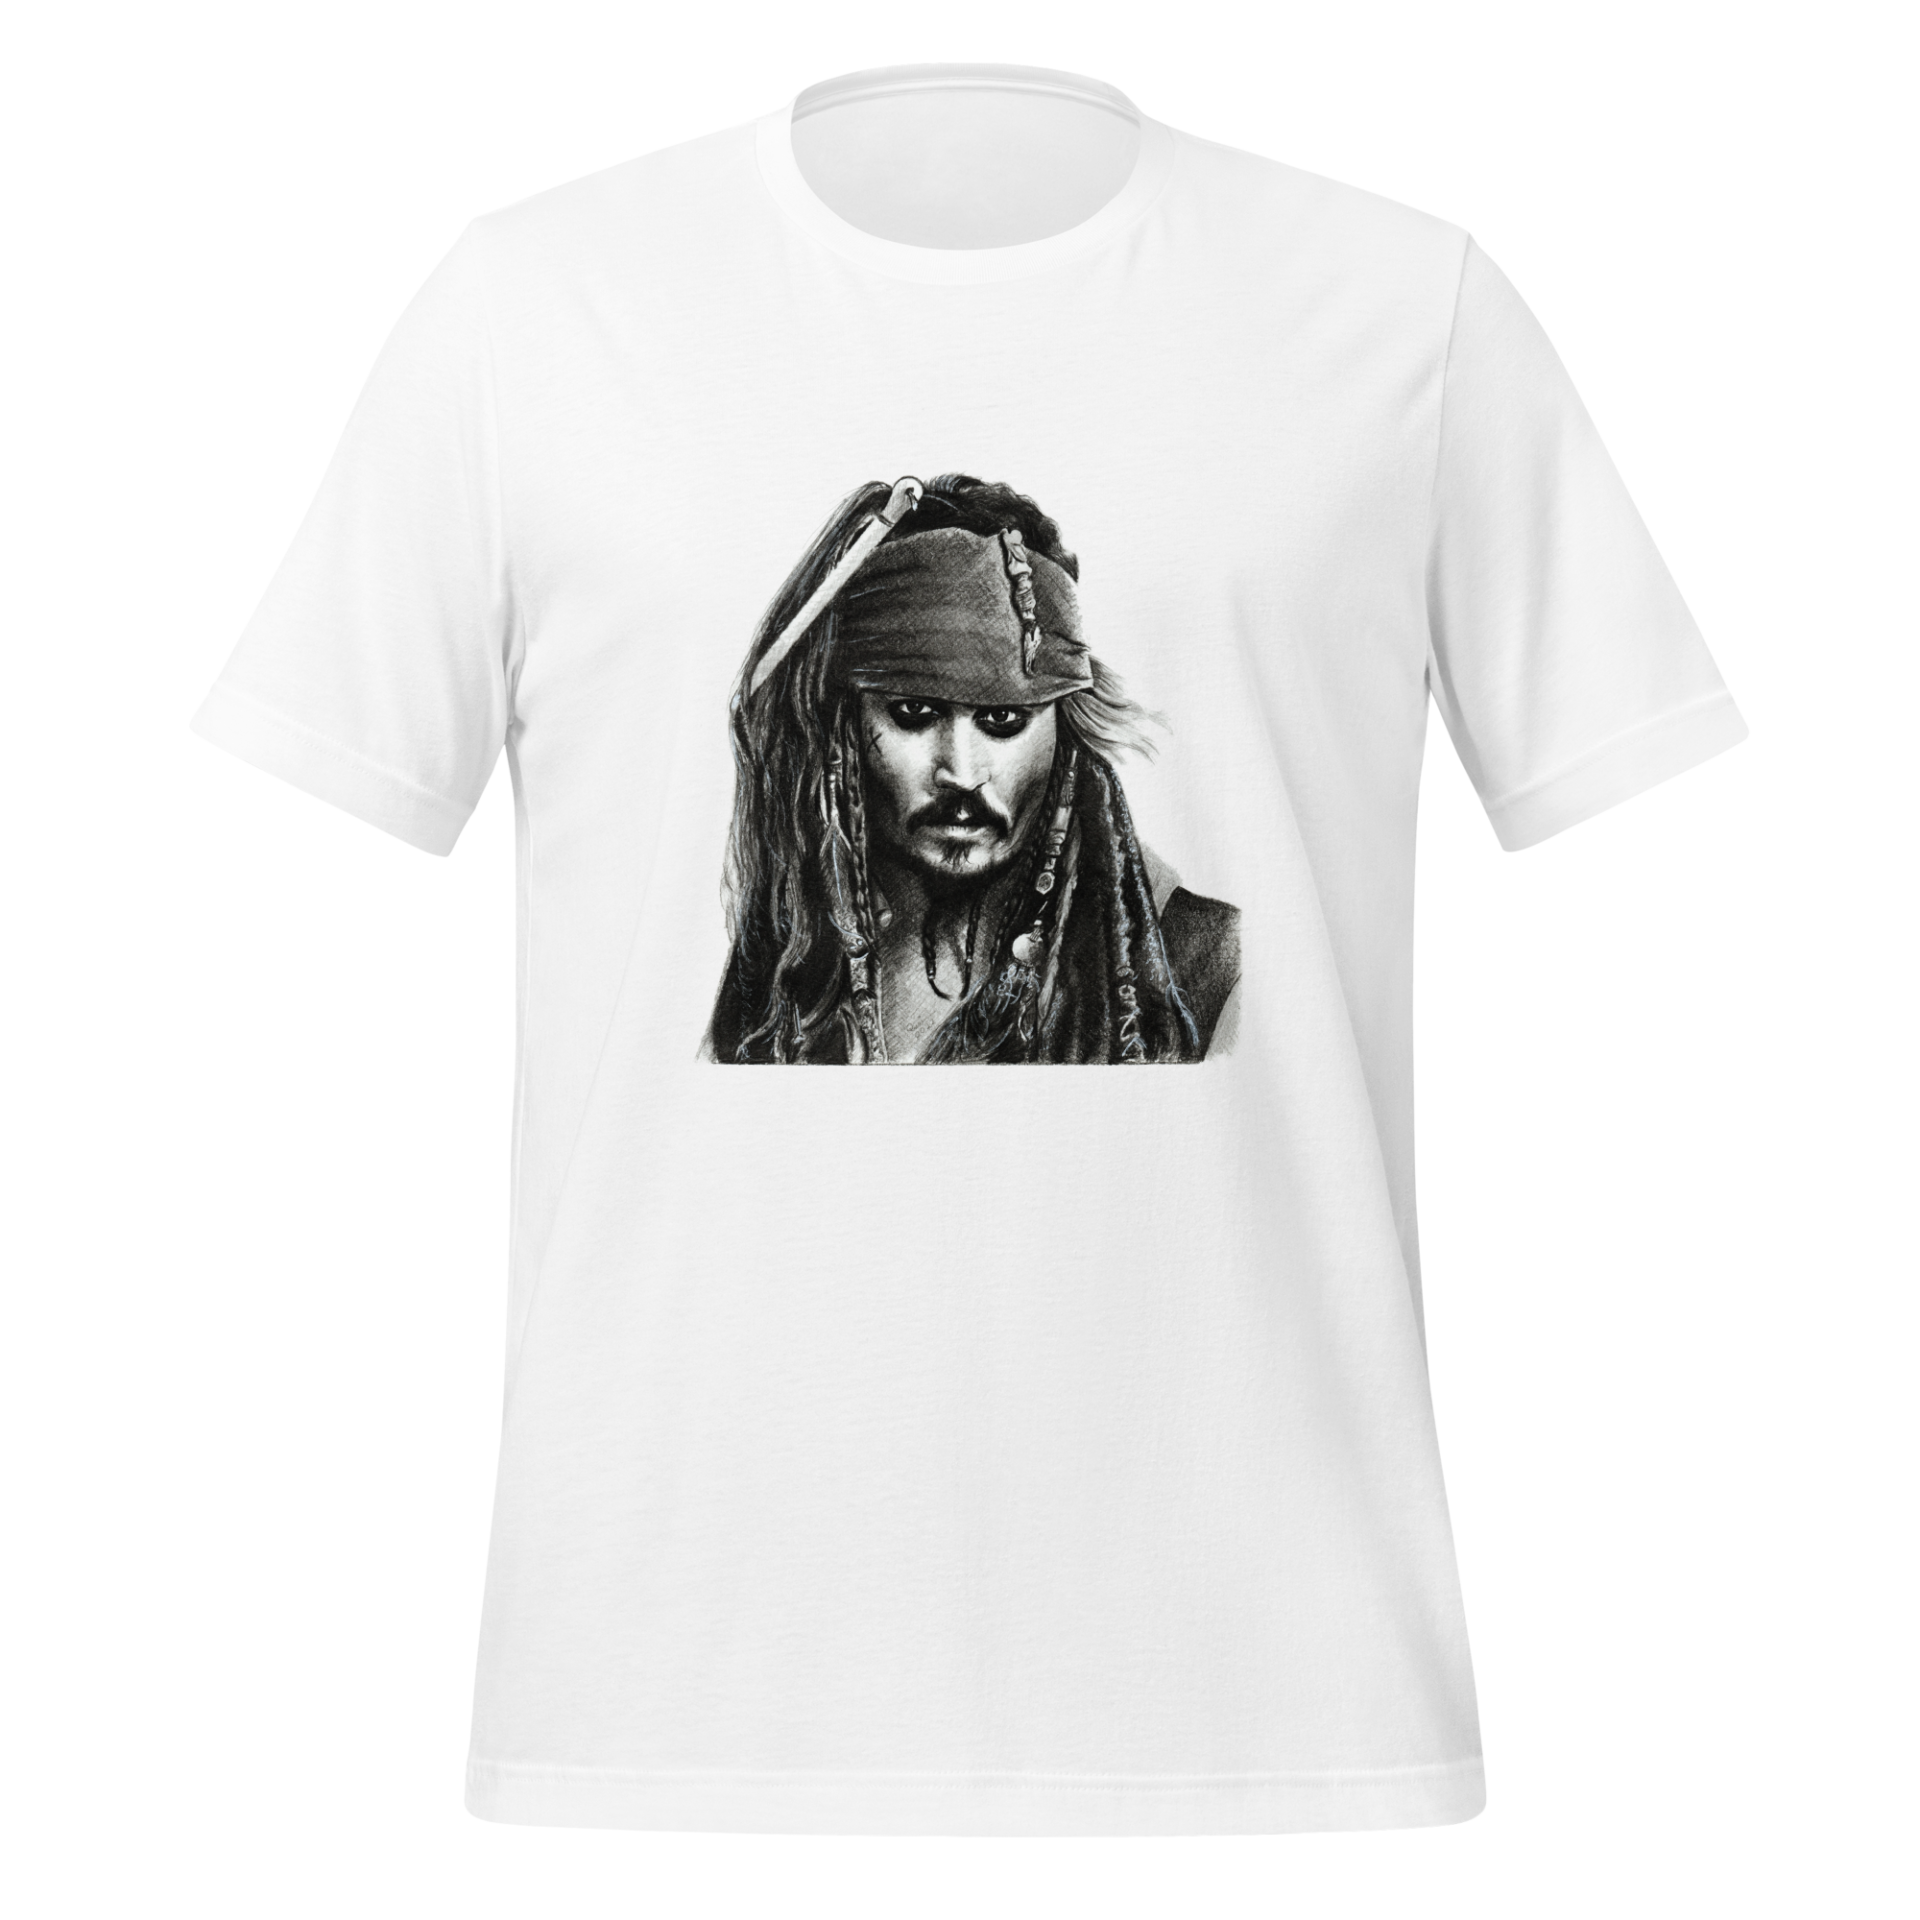 EyeXcite transforms your favorite photo into a hand-drawn sketch and print it on a T-shirt of your choice. It can be a treat for yourself or your loved one. You can even sketch photo of your furred friend.